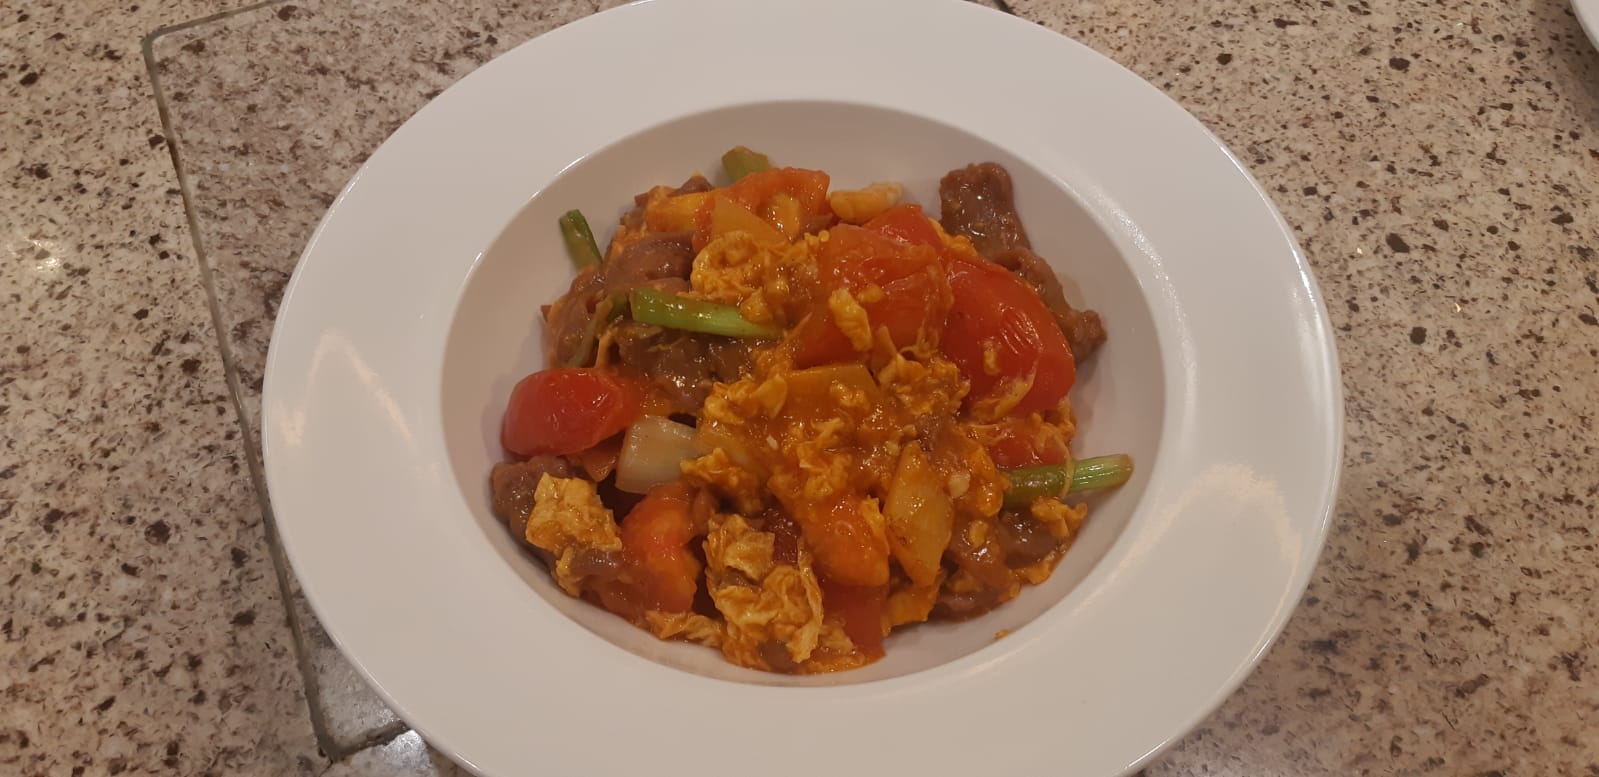 Stir-fried Beef with Tomato and Egg